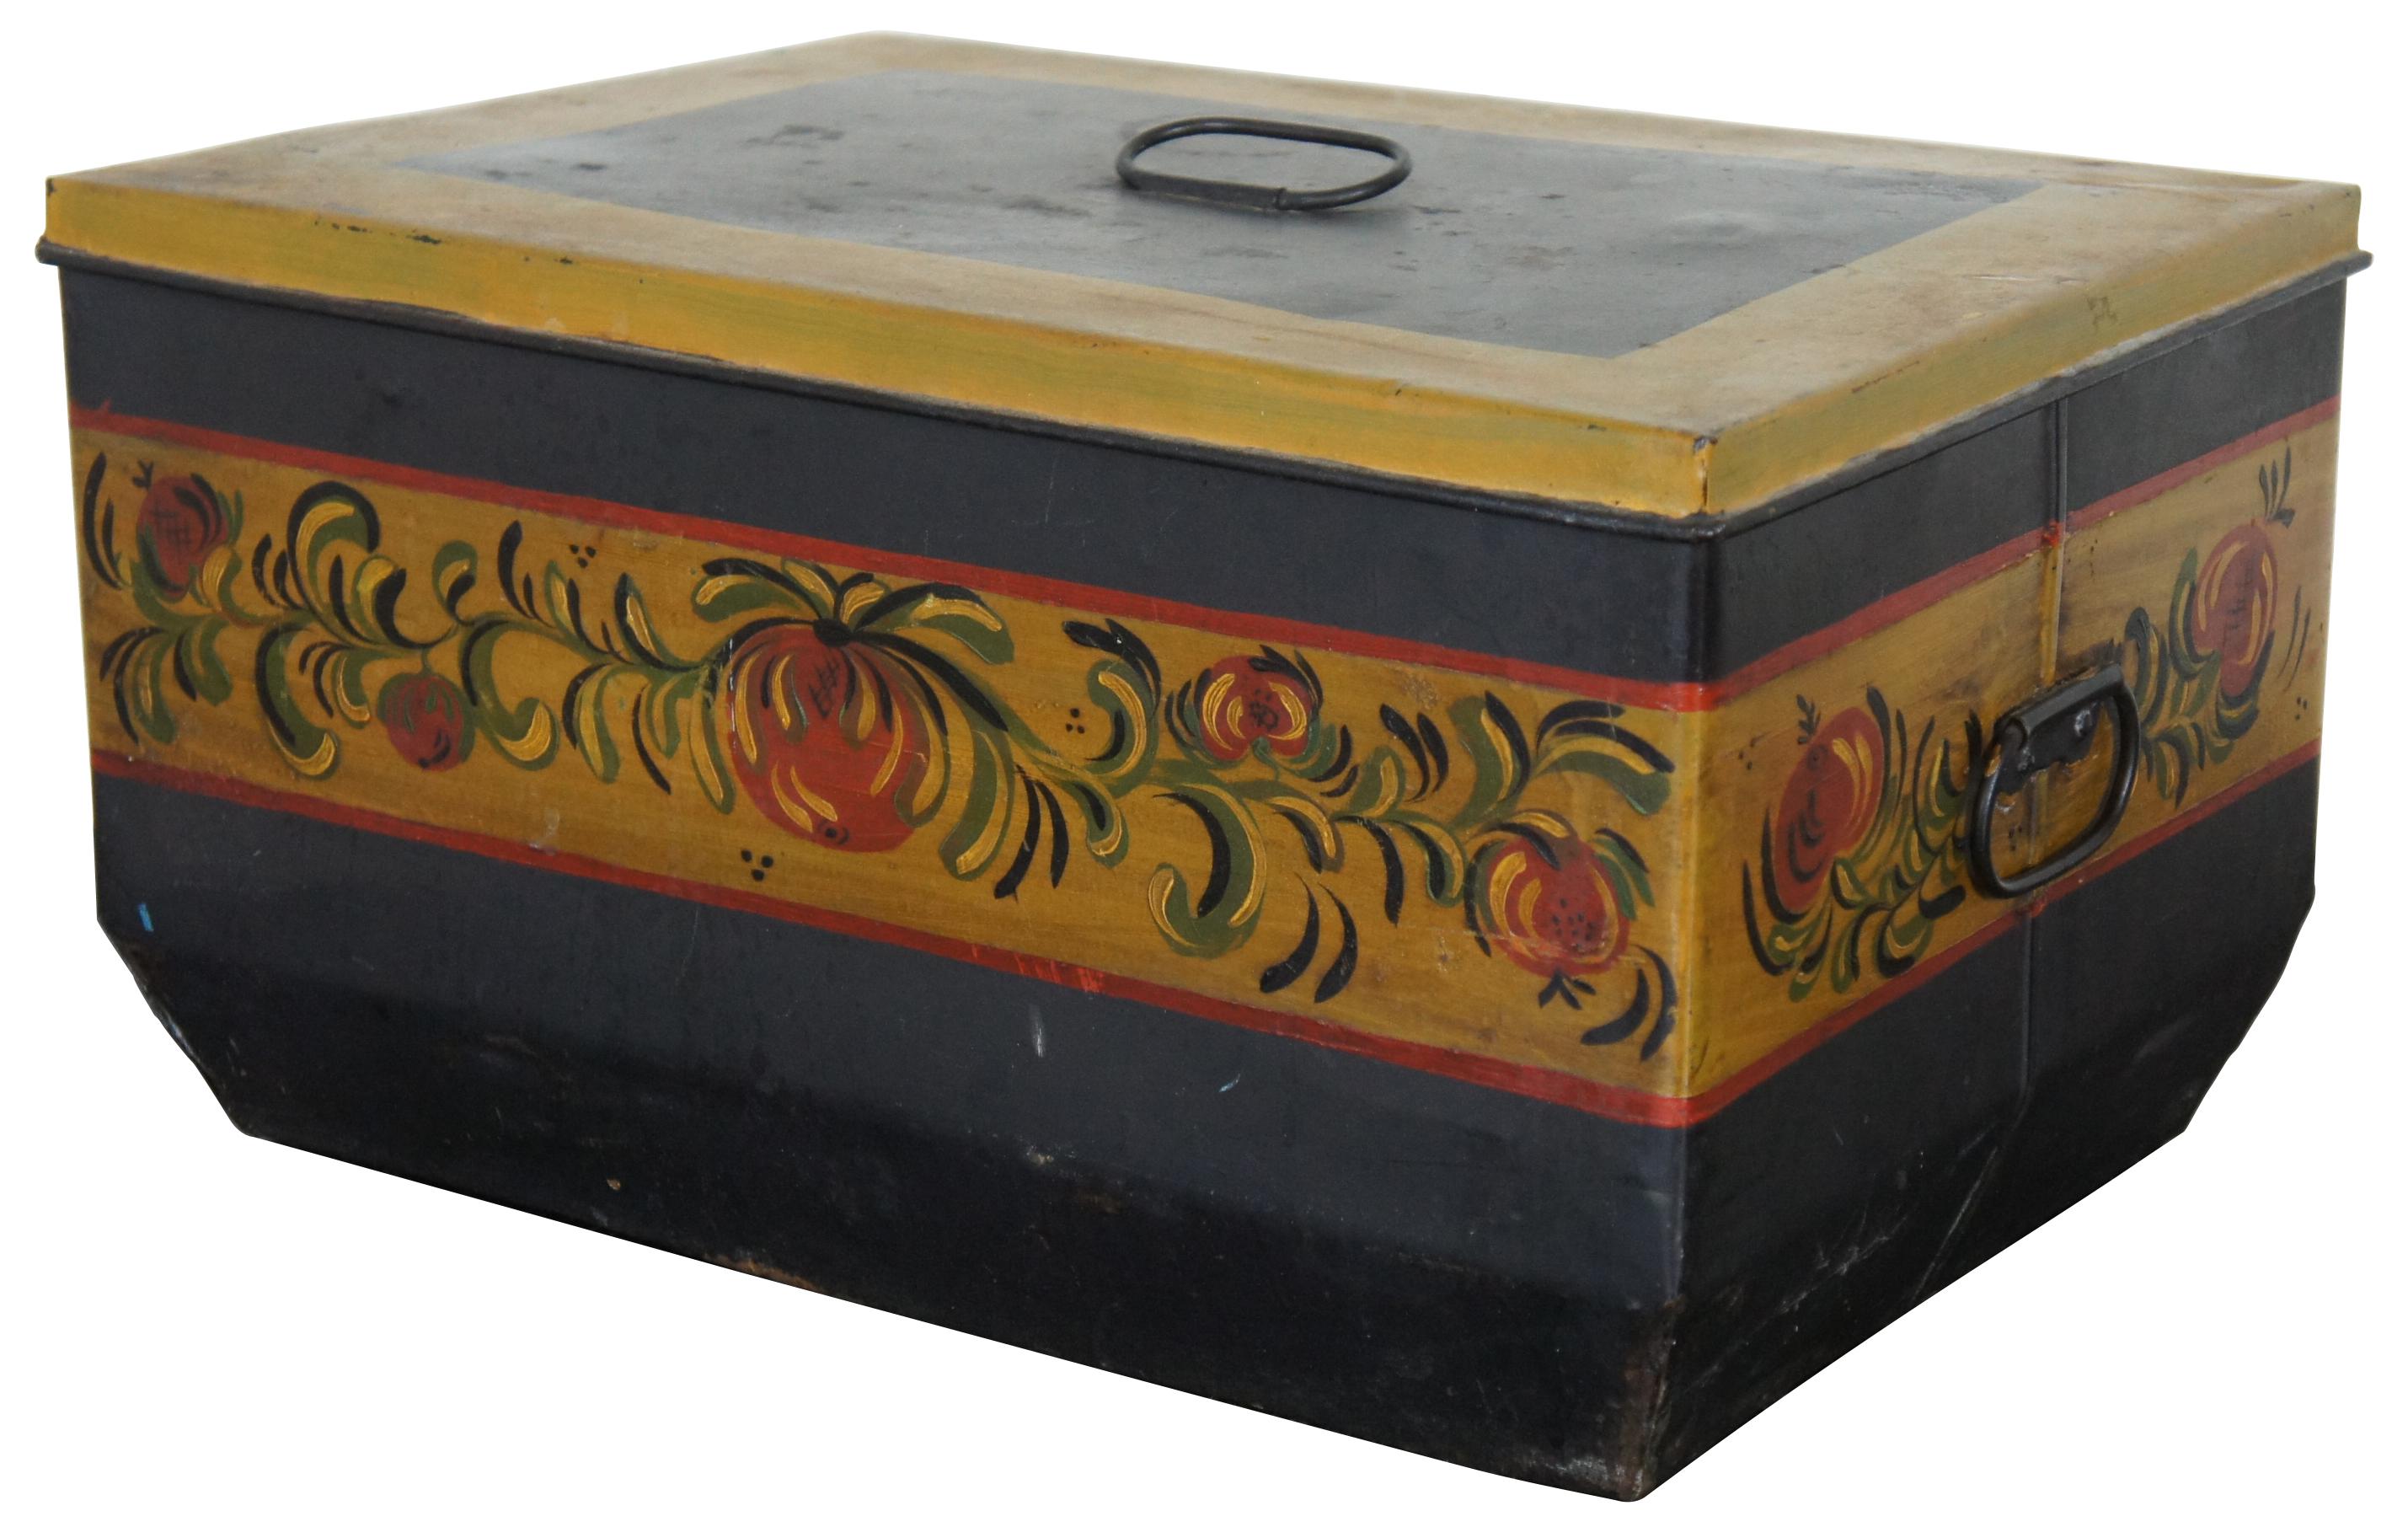 Antique painted toleware bread box by the Central Manufacturing Co, decorated with red tomatoes. The interior tray is removable and pierced with ventilation holes for airflow. 
 